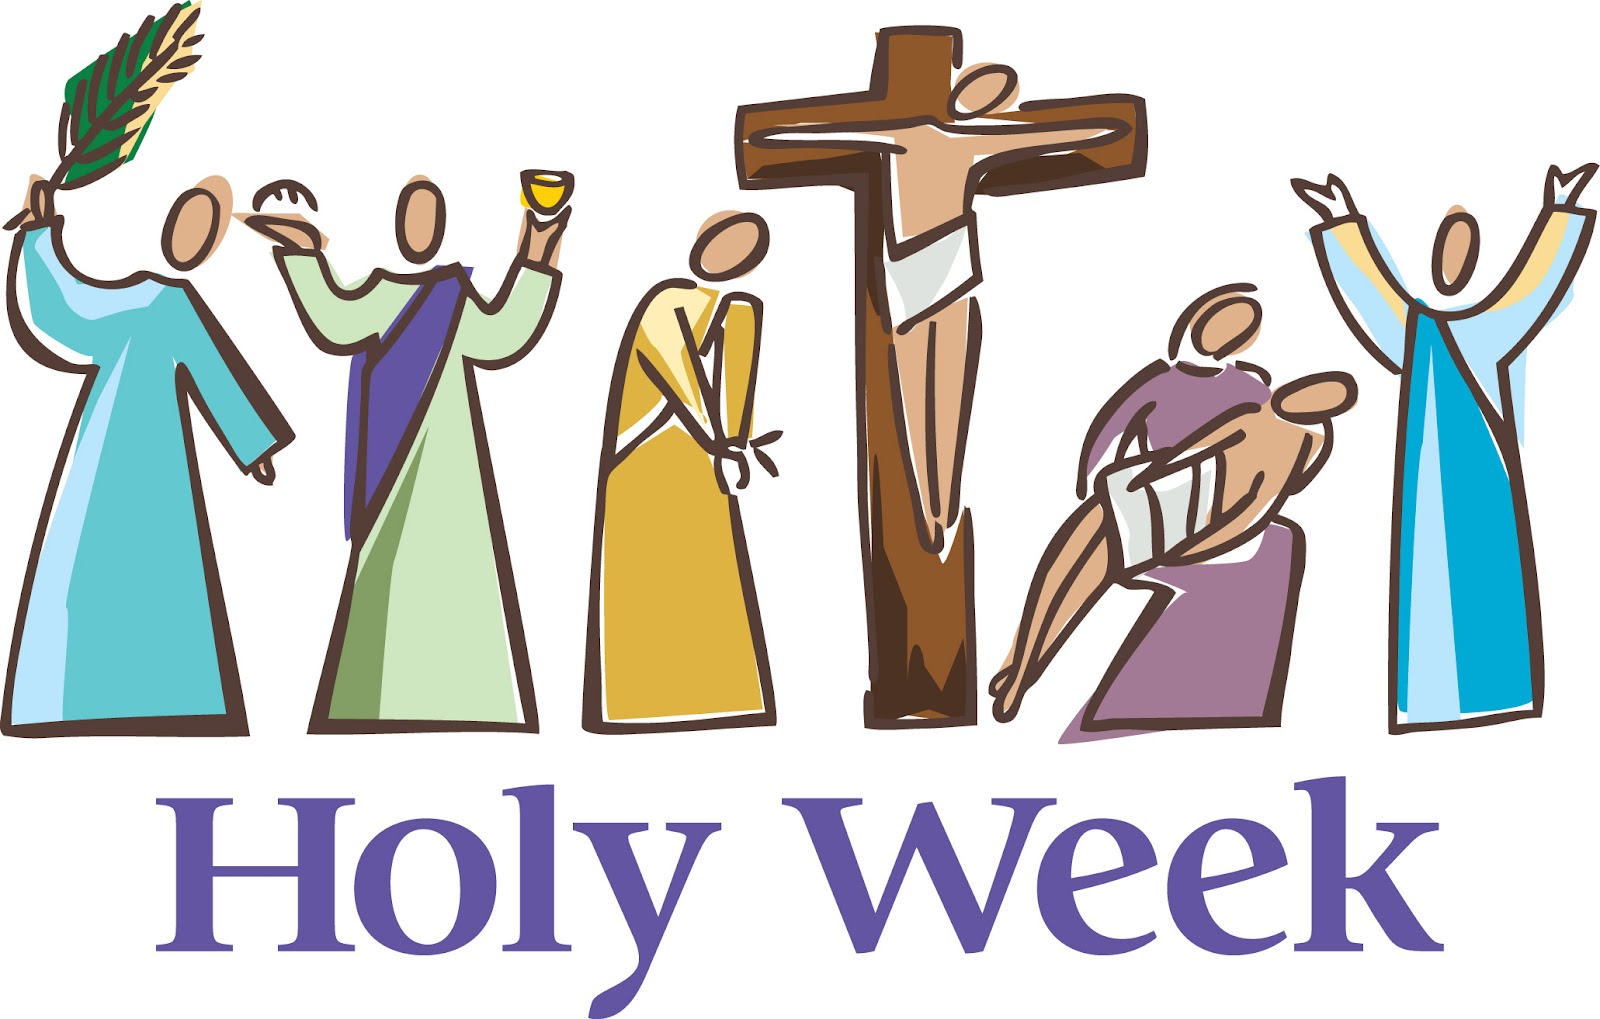 Have A Blessed Week Clipart   Cliparthut   Free Clipart